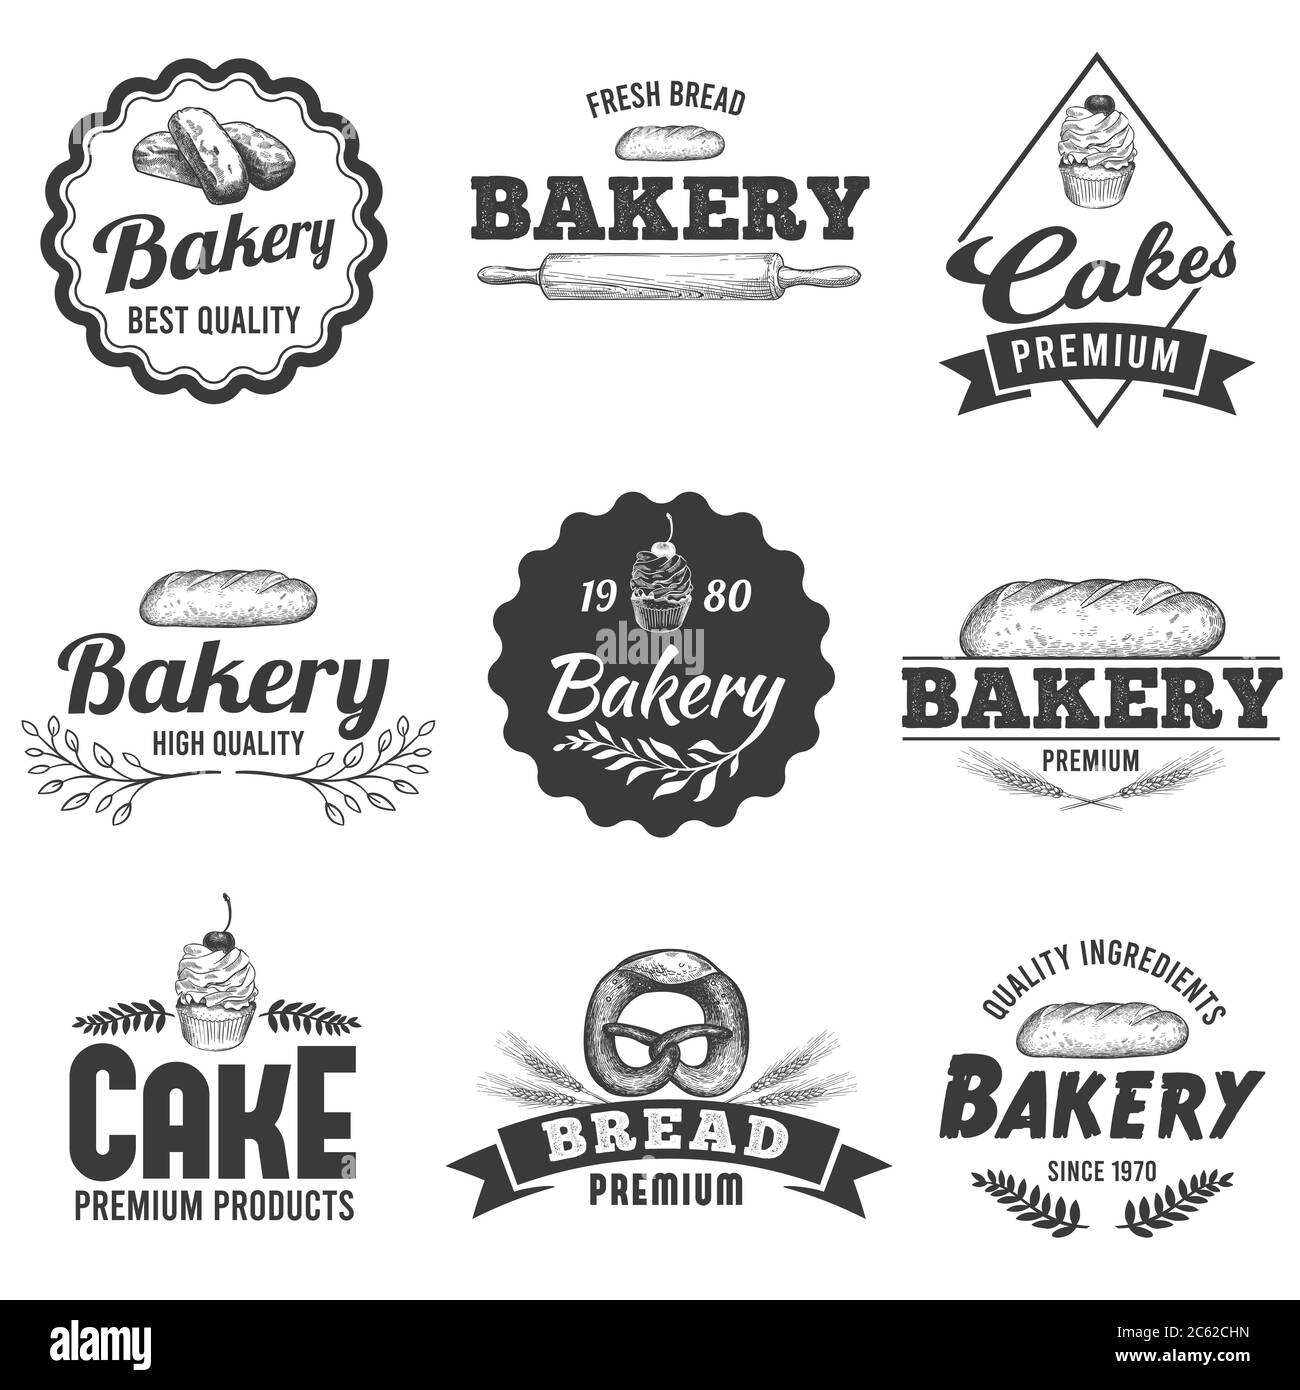 Vector set of baking equipment. Home bakery. Illustration of cakes,  cupcakes, bread and other pastries. Stock Vector